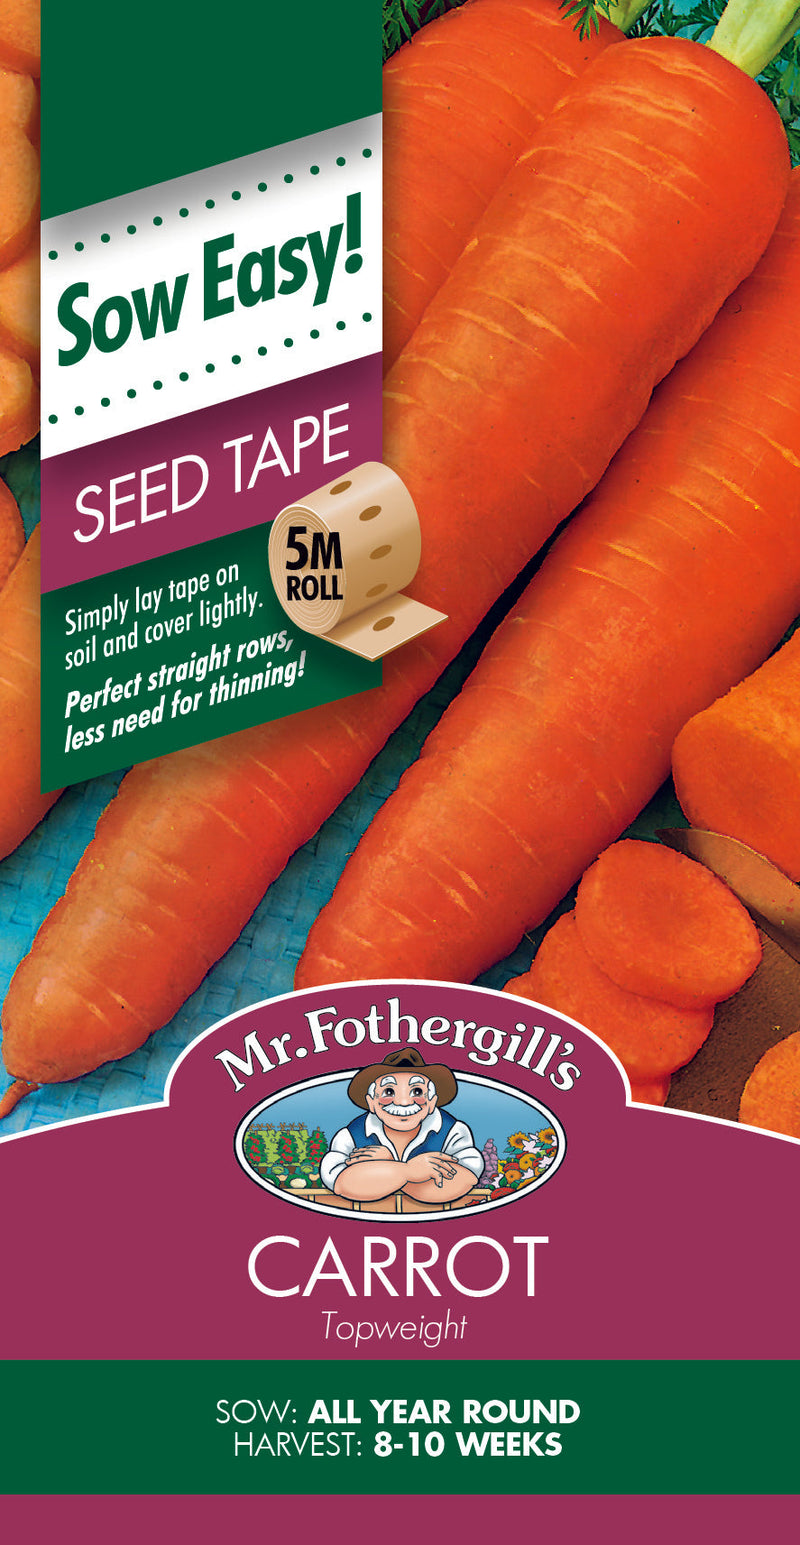 SEEDS D CARROT TOPWEIGHT SEED TAPE